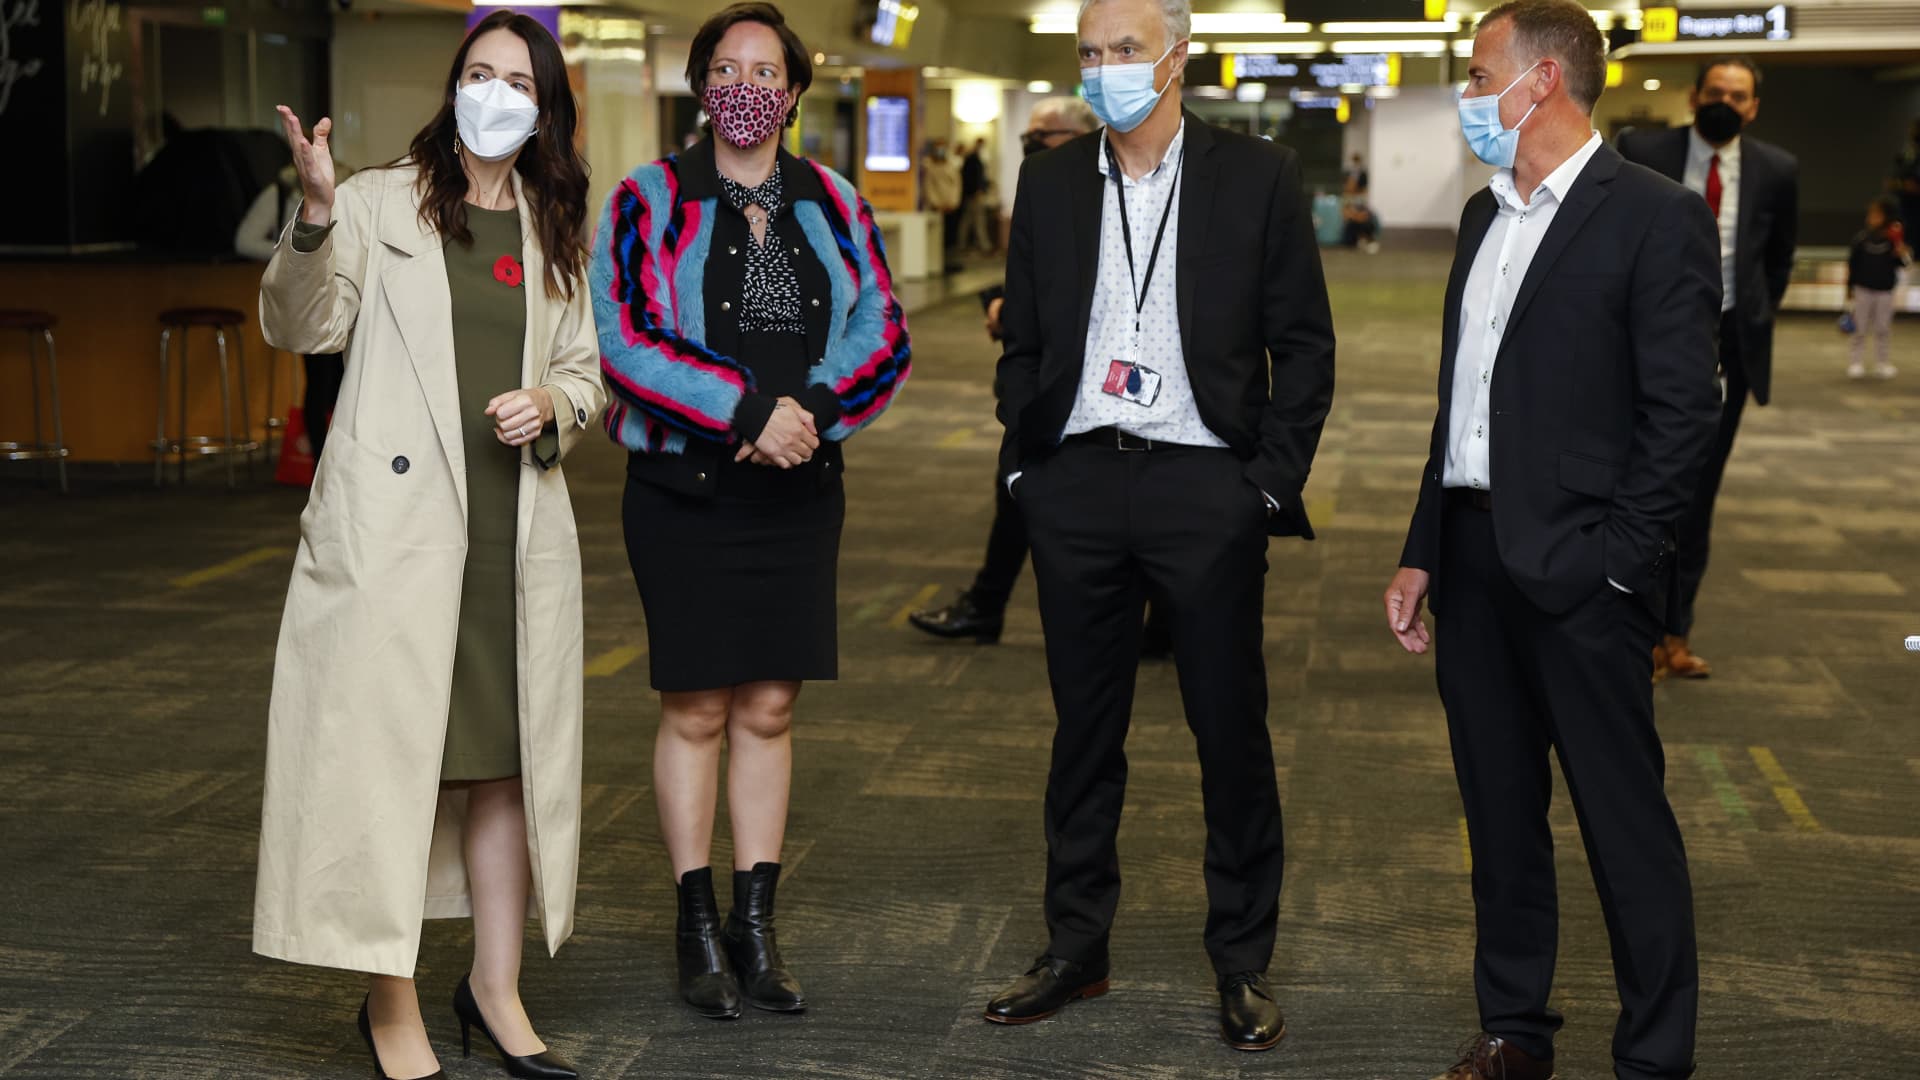 New Zealand ends most Covid restrictions as pandemic worry eases